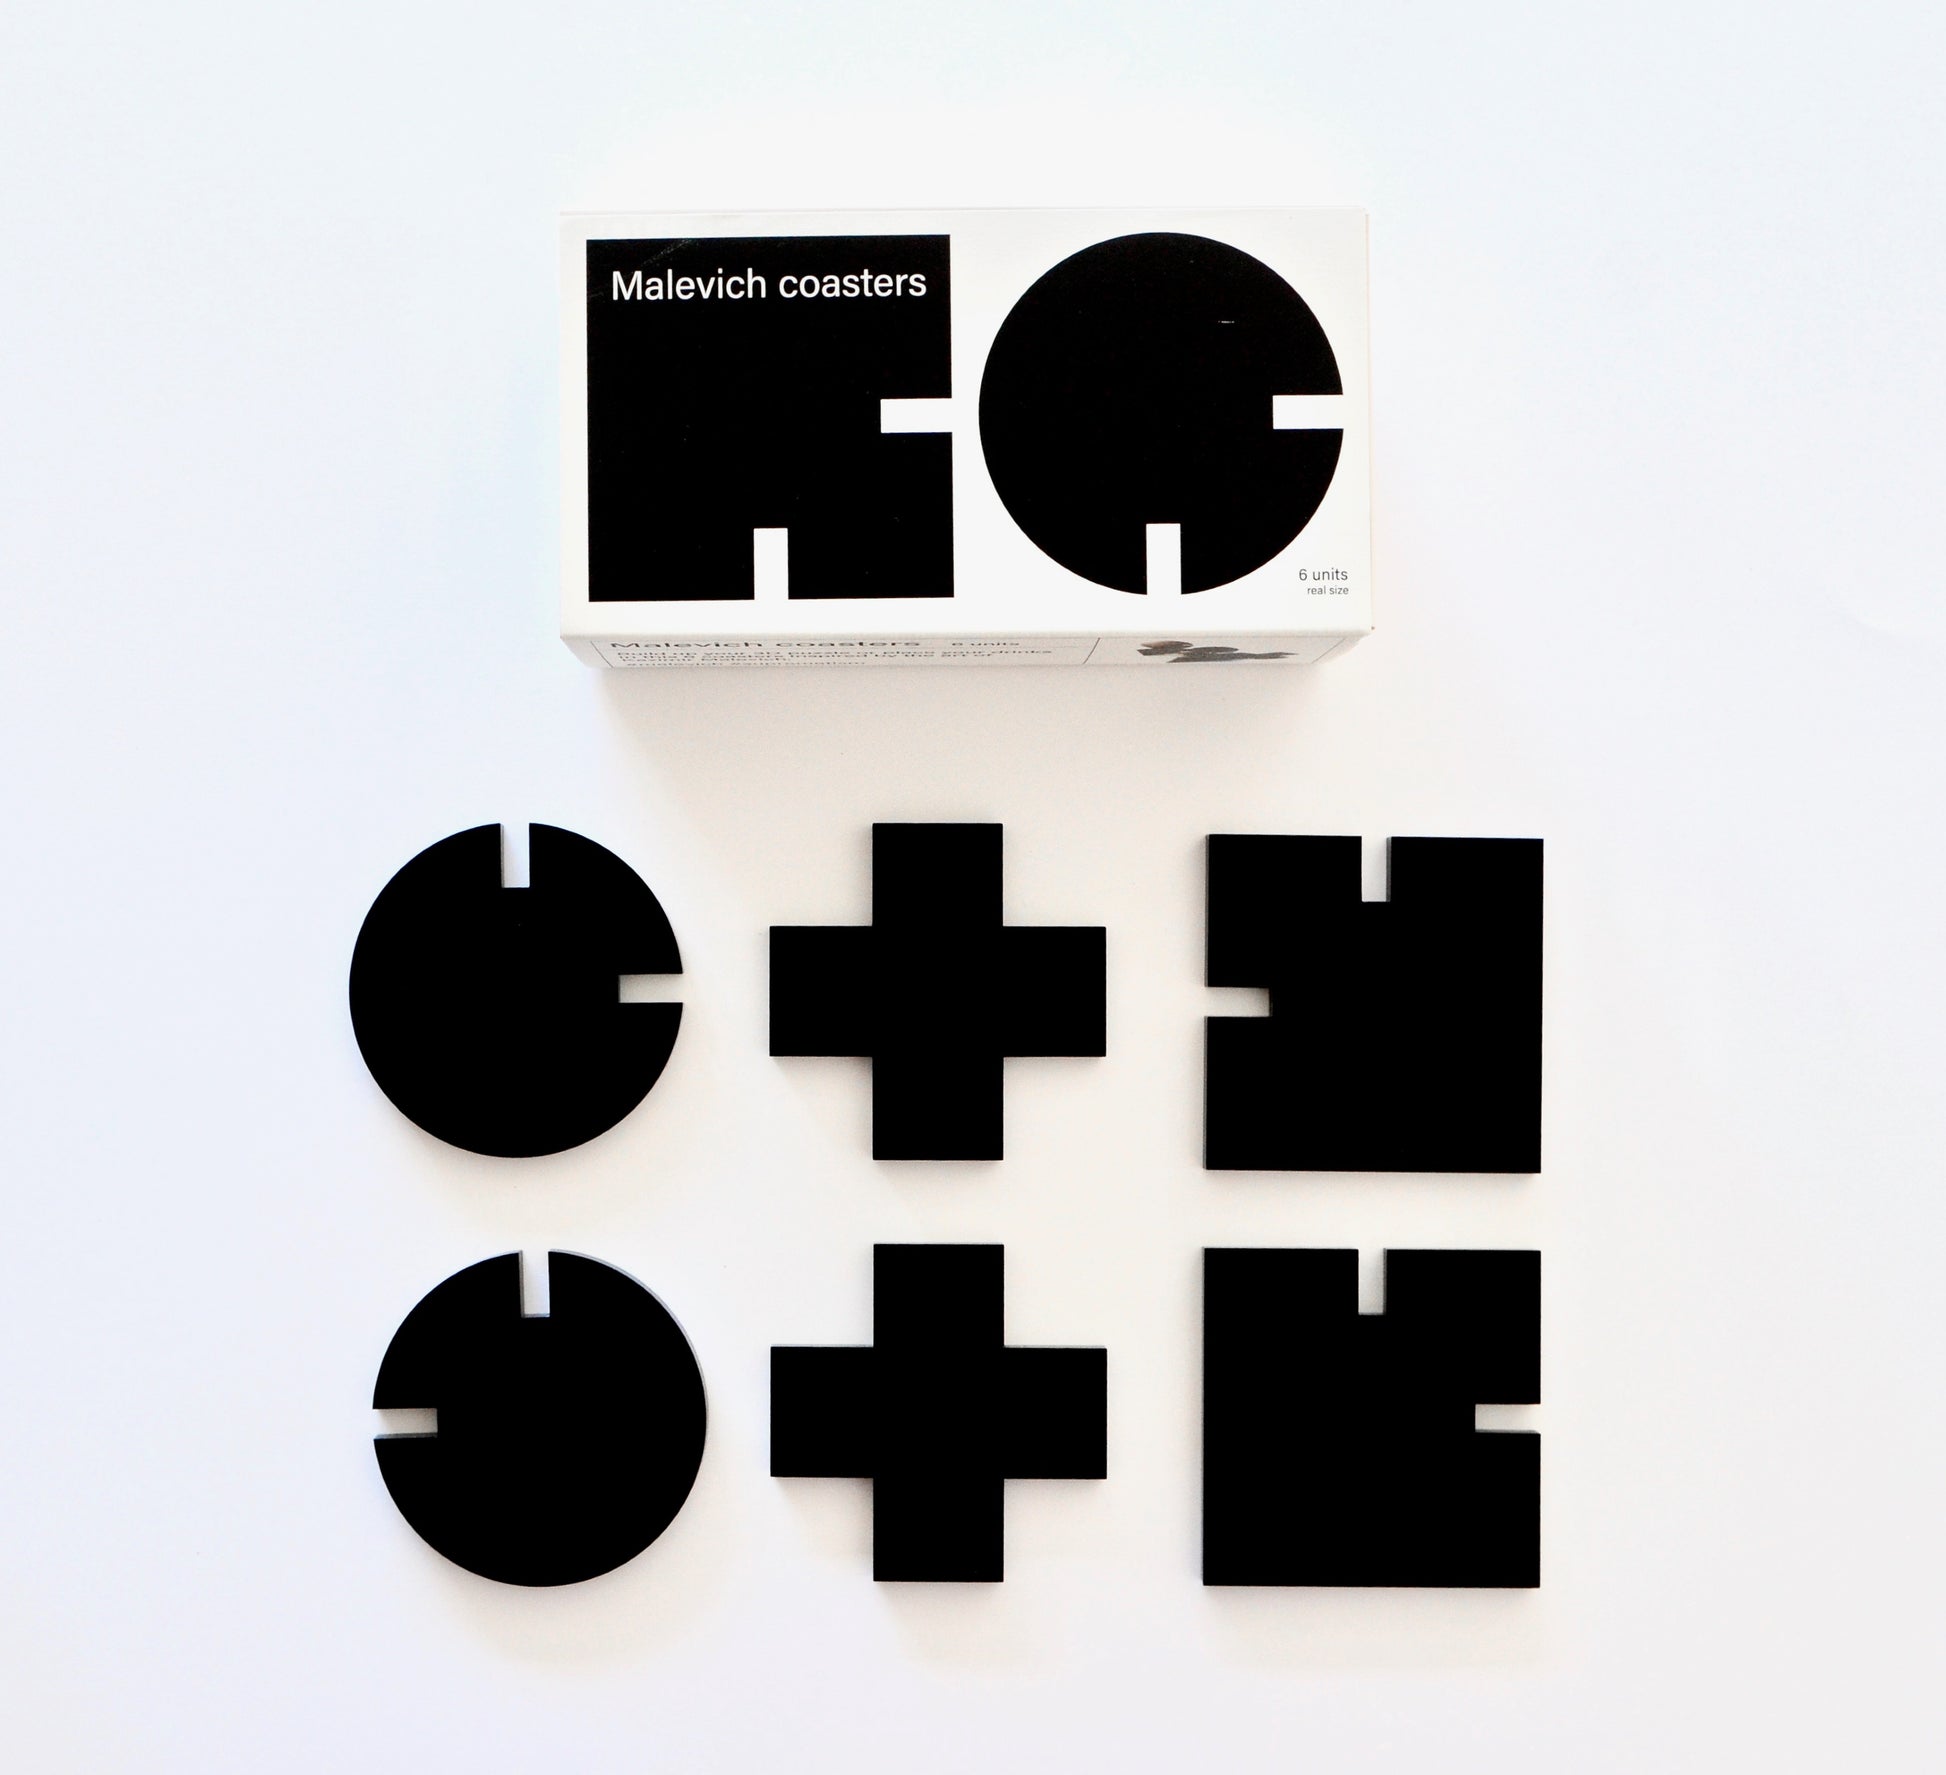 The 6 Malevich Coasters  beamalevich architecture gift design gift art gift